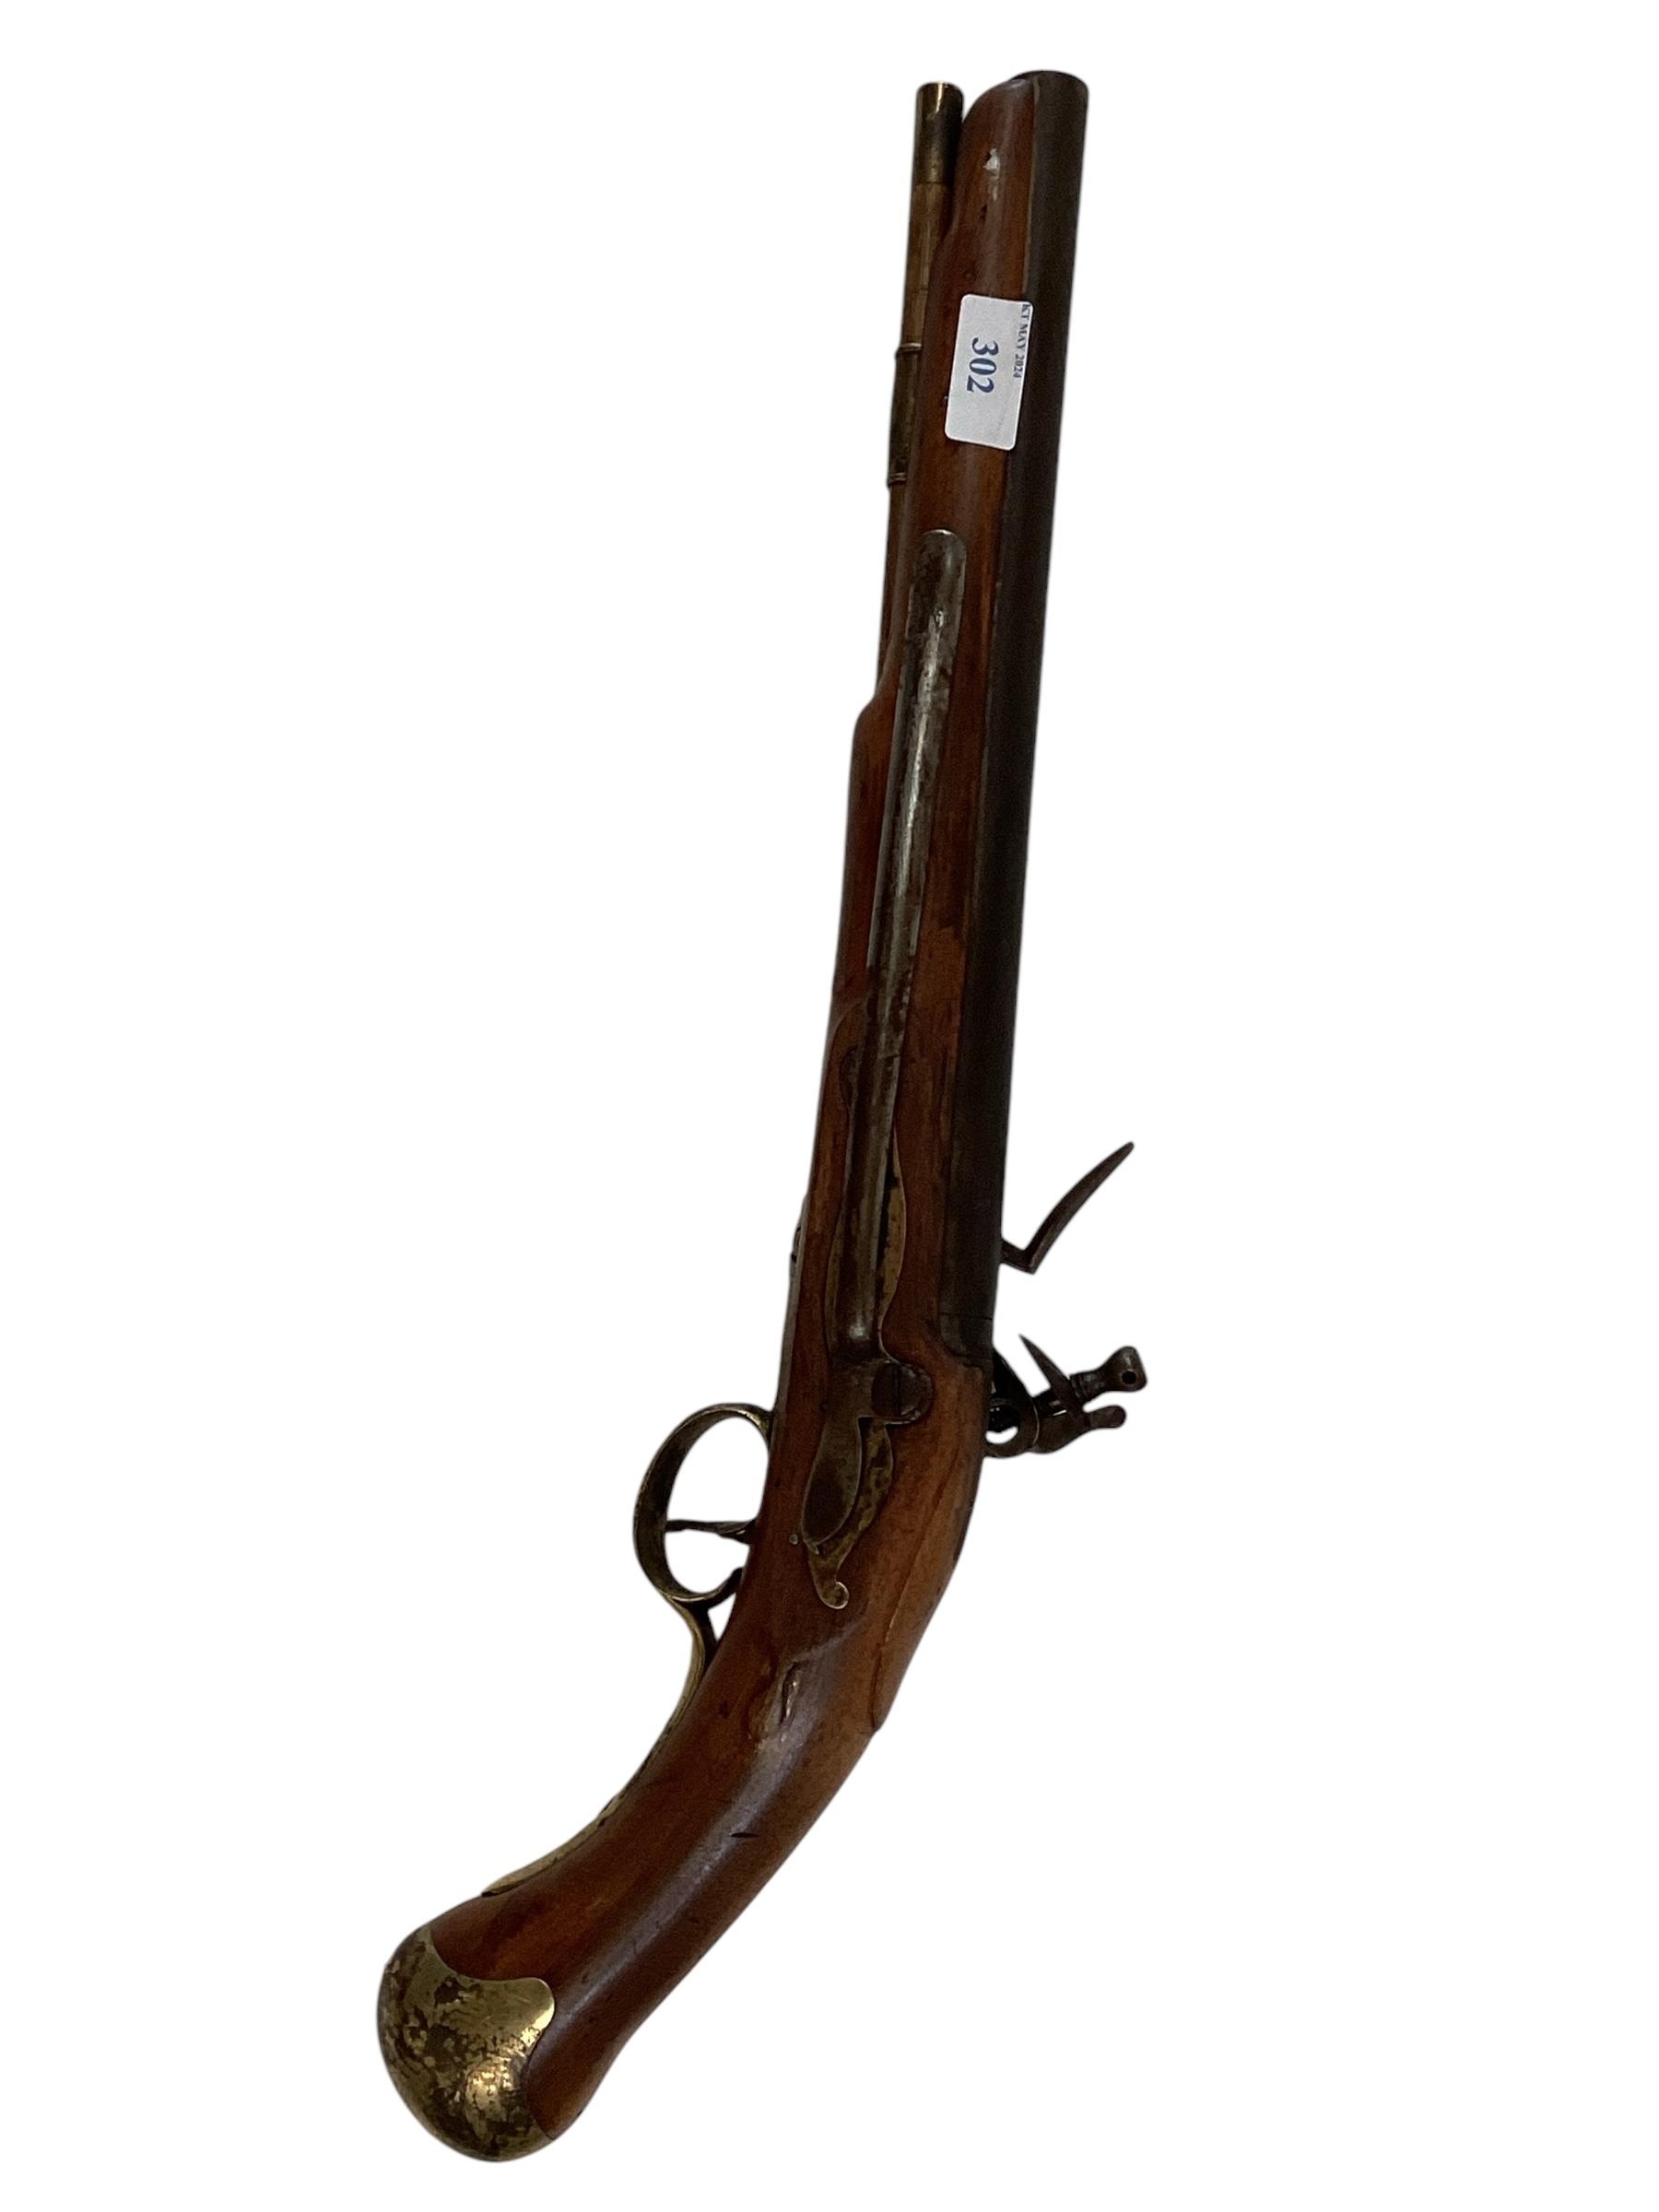 A flintlock pistol Stamped 'Tower' GR Cypher with Crown and broad arrow stamp. Circa 1800. Tower L